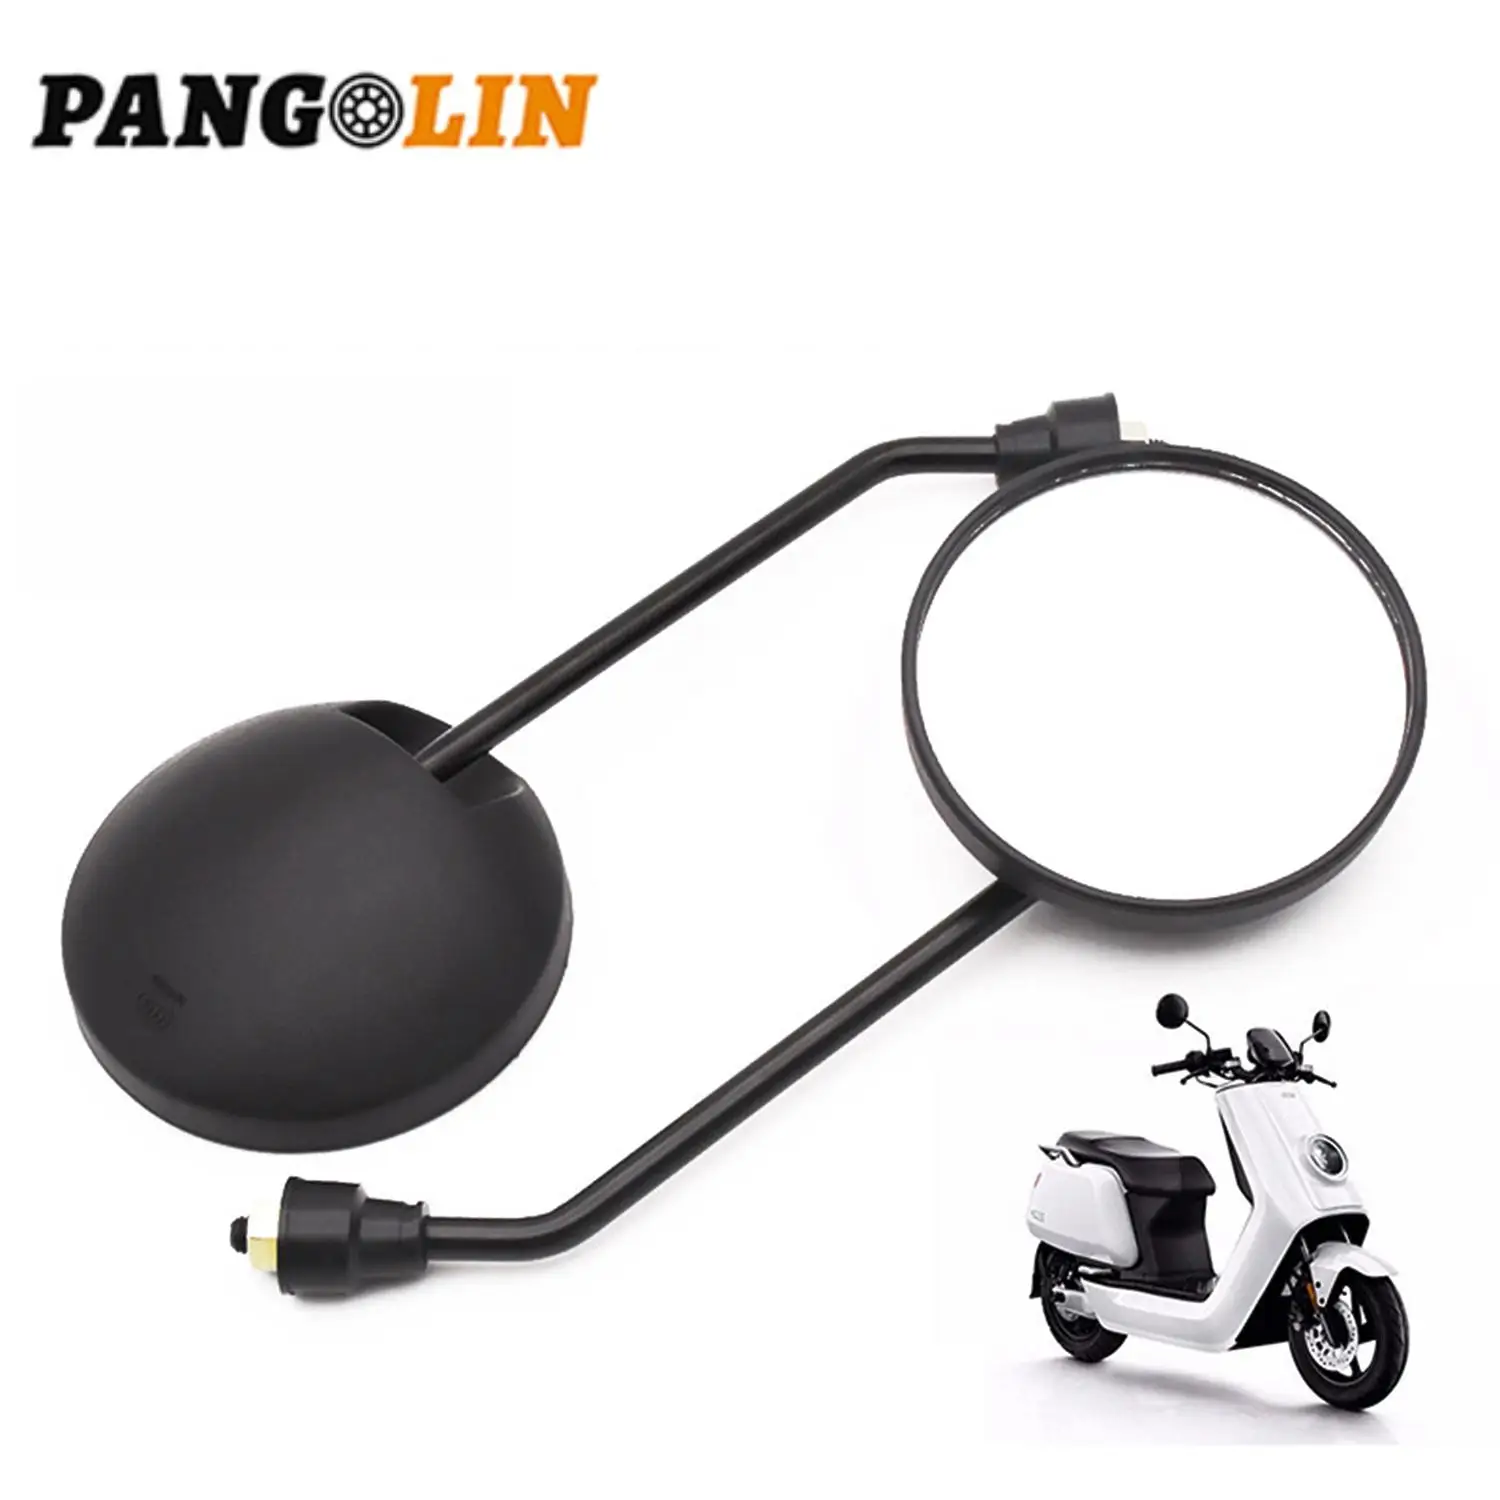 

1PC New Universal Motorcycle Rounded Side Back View Mirror Motorbike e-bike Scooter 10mm 8mm Thread Rearview Mirrors For Honda